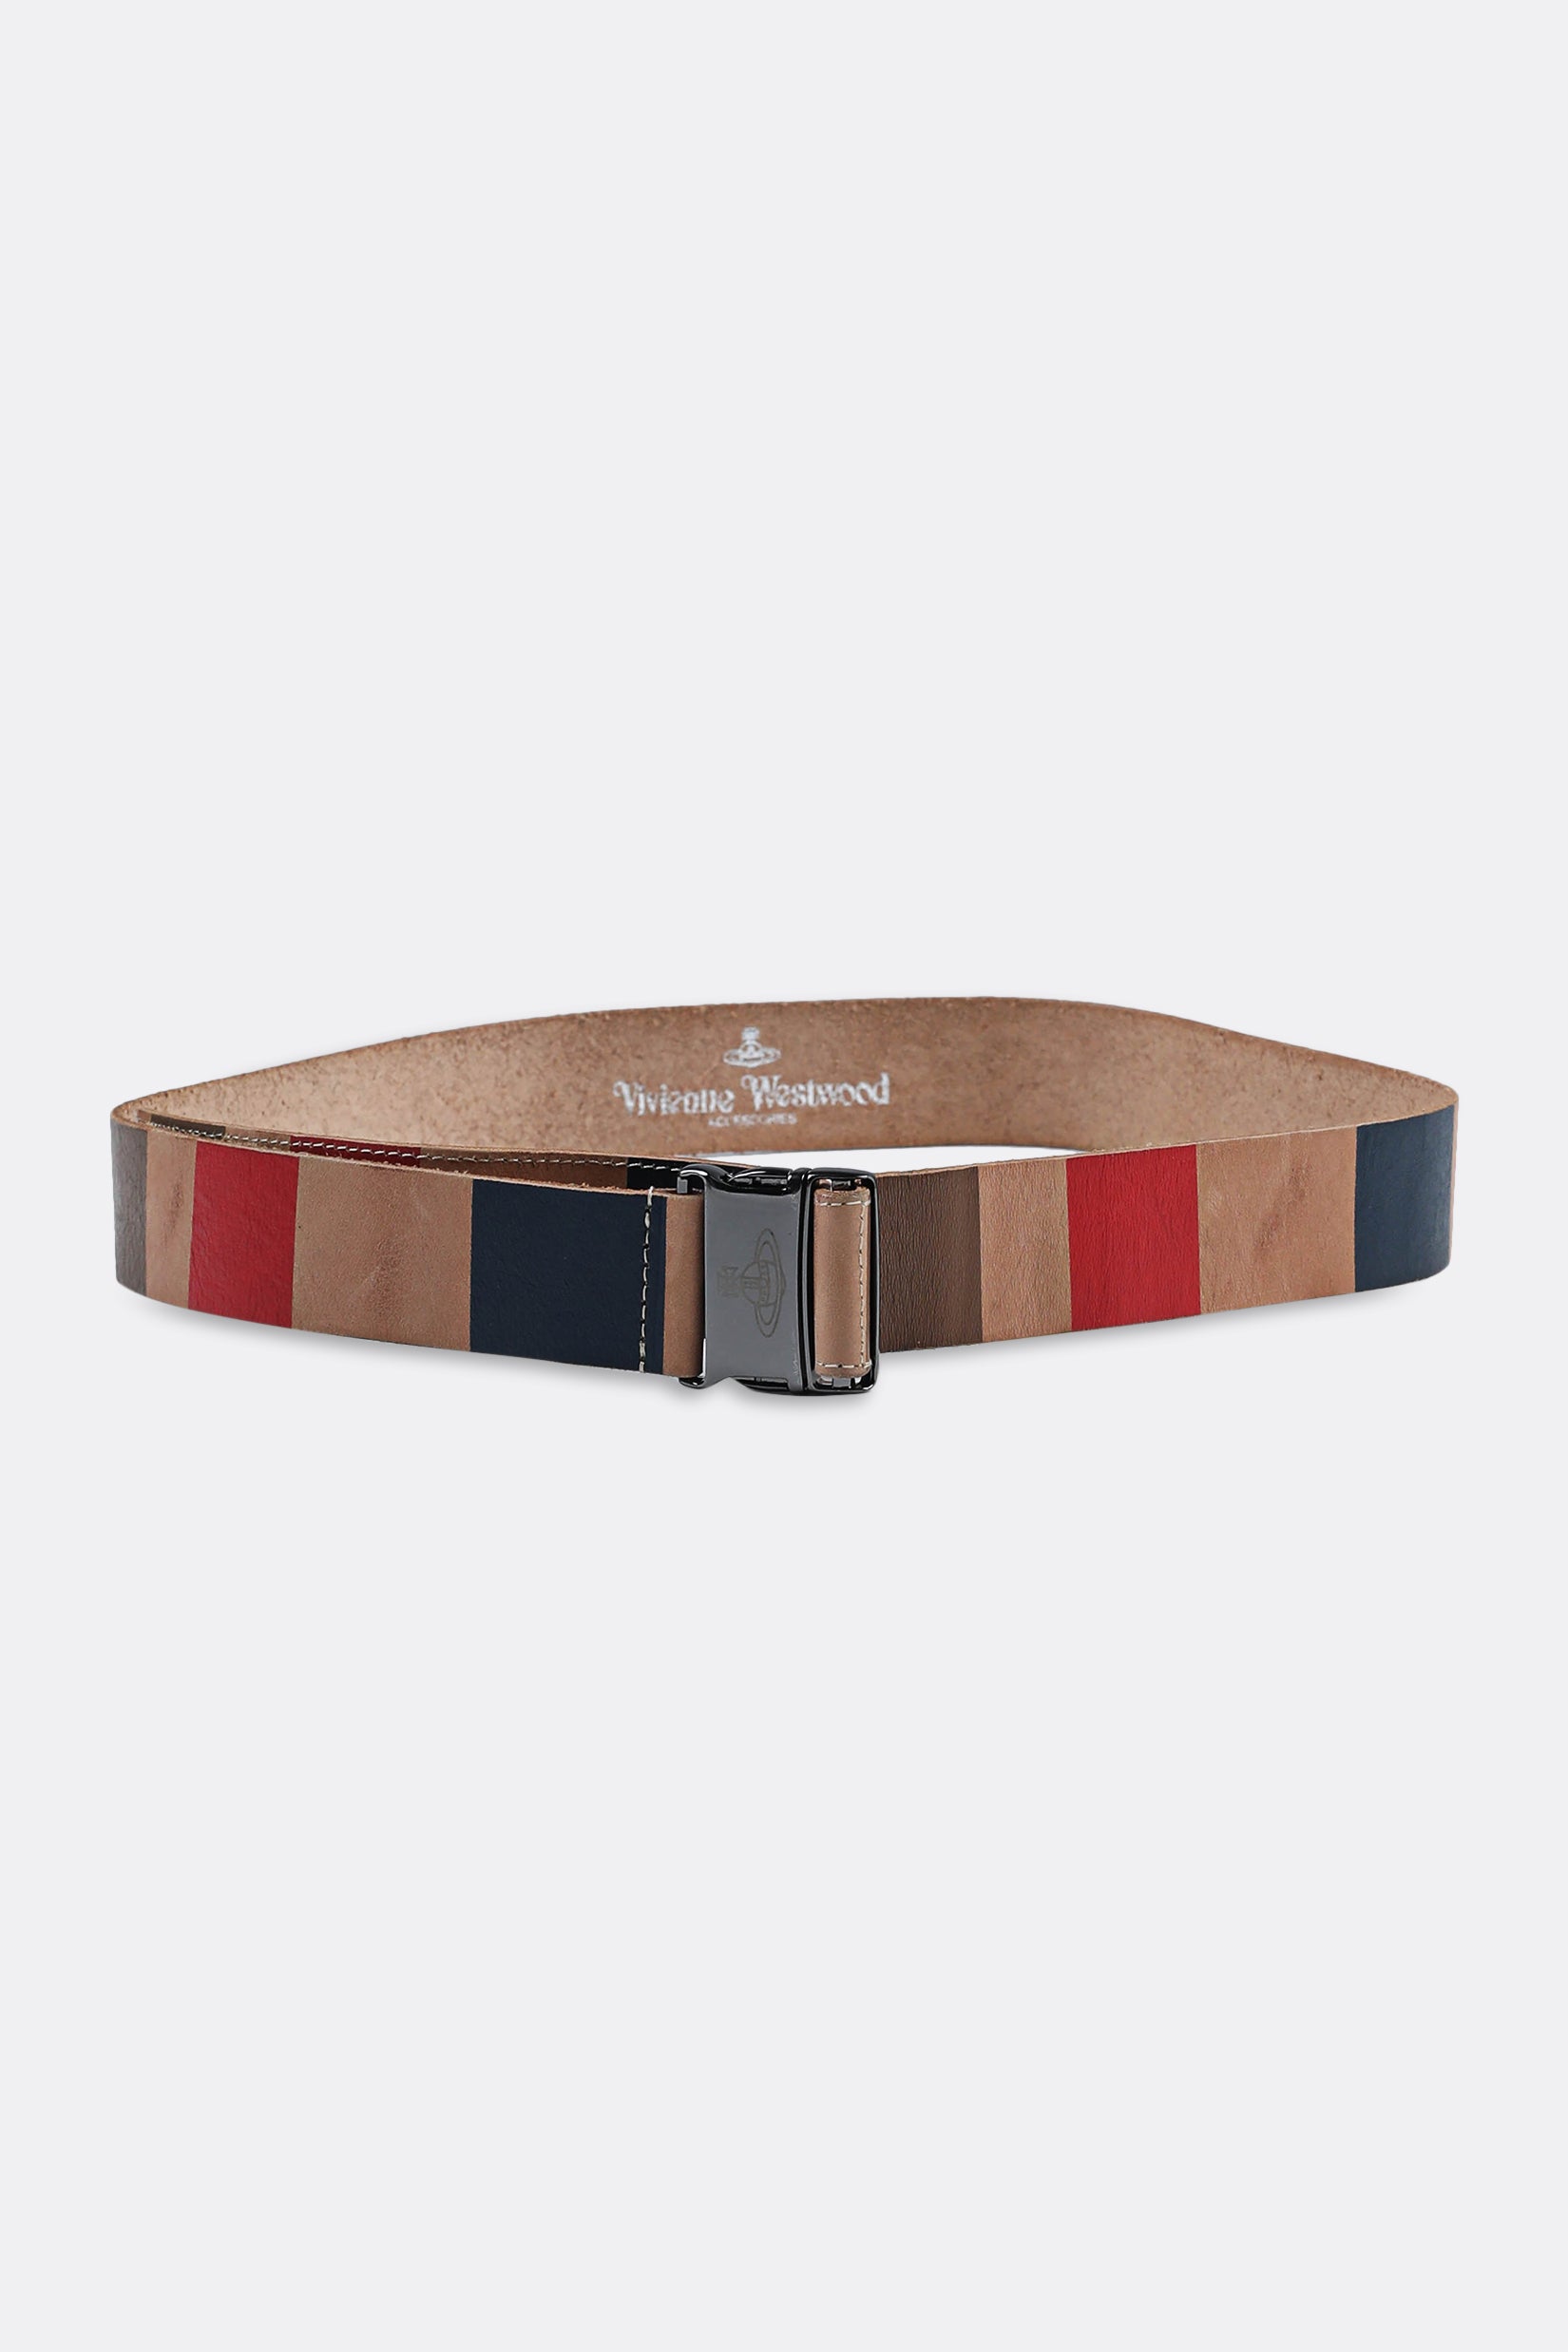 Burberry Reversible Check E-Canvas & Leather Belt